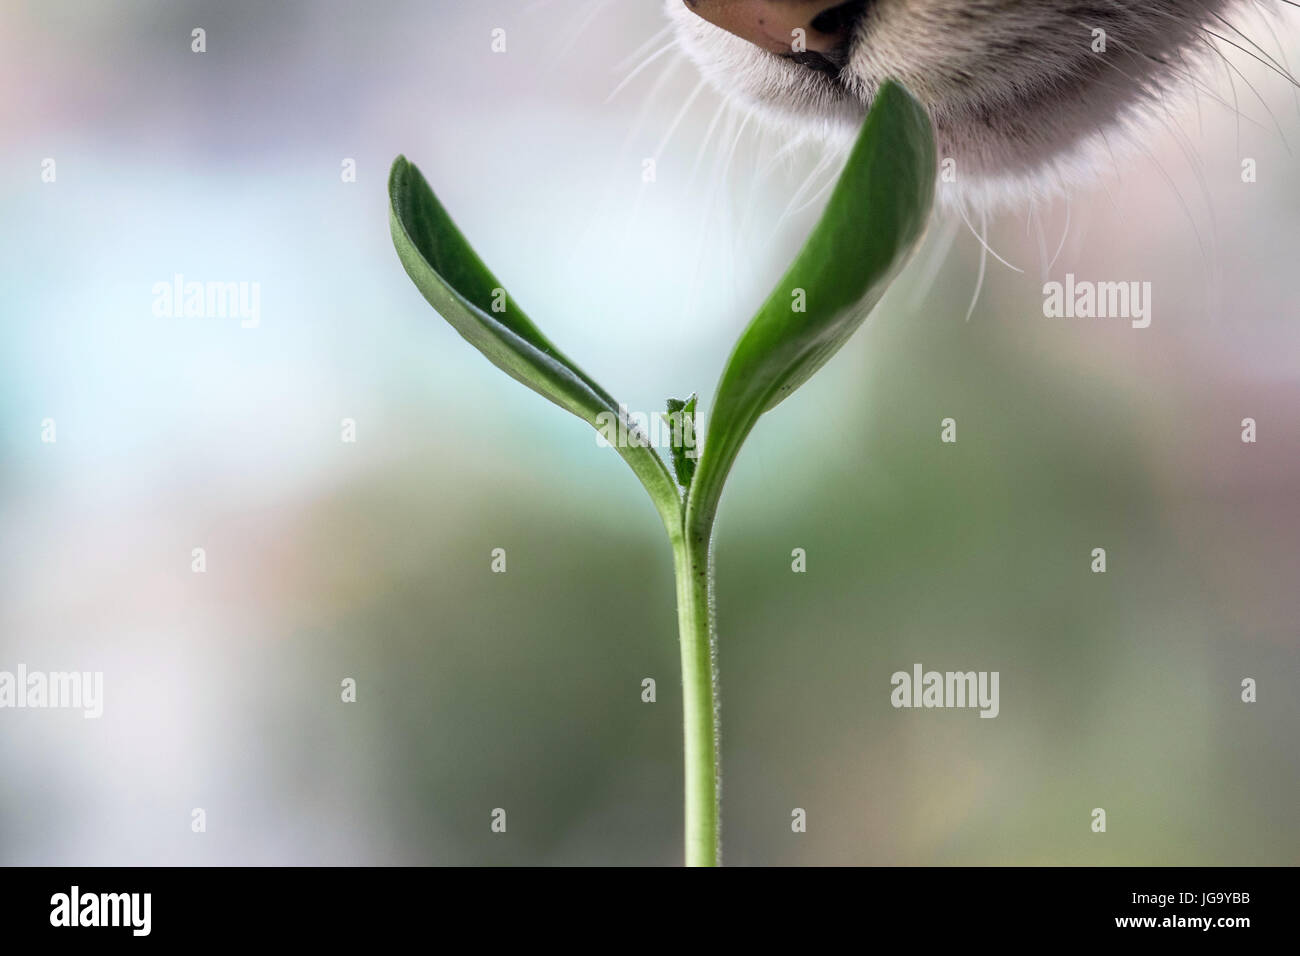 Closeup of a cat nose sniffing a young sprouting beautiful green plant, with out of focus background Stock Photo